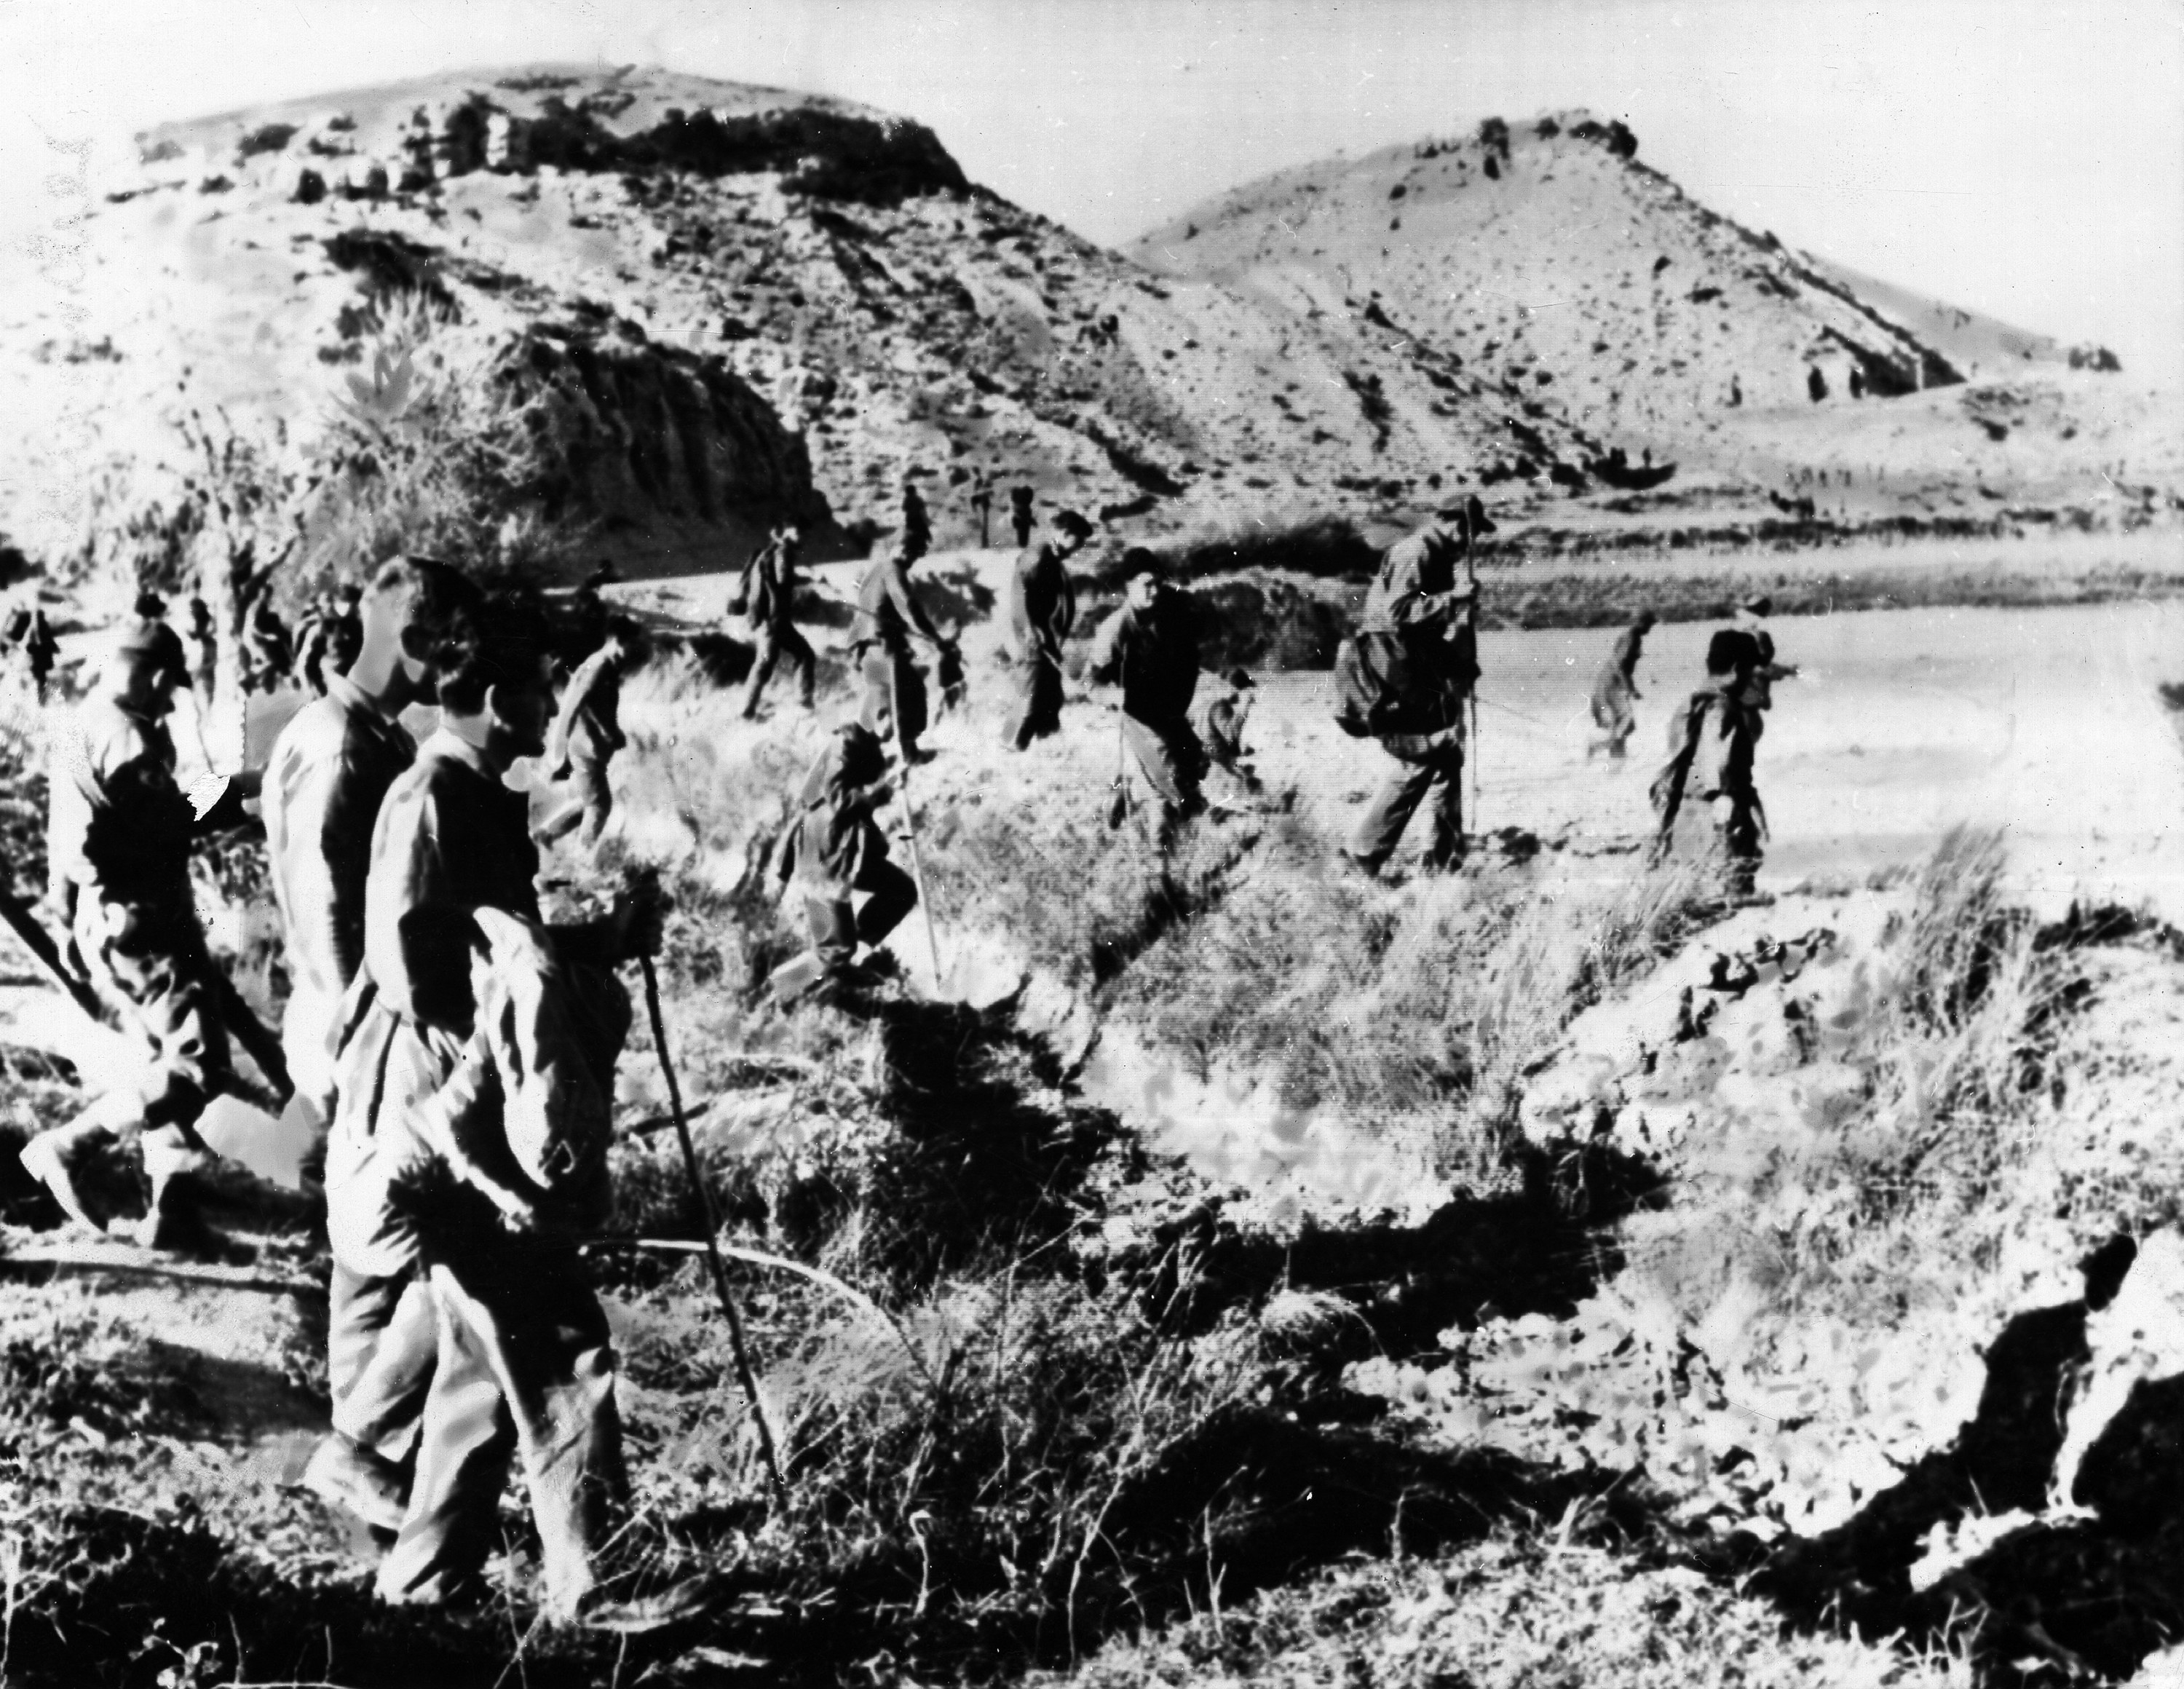 Soldiers searching for bombs